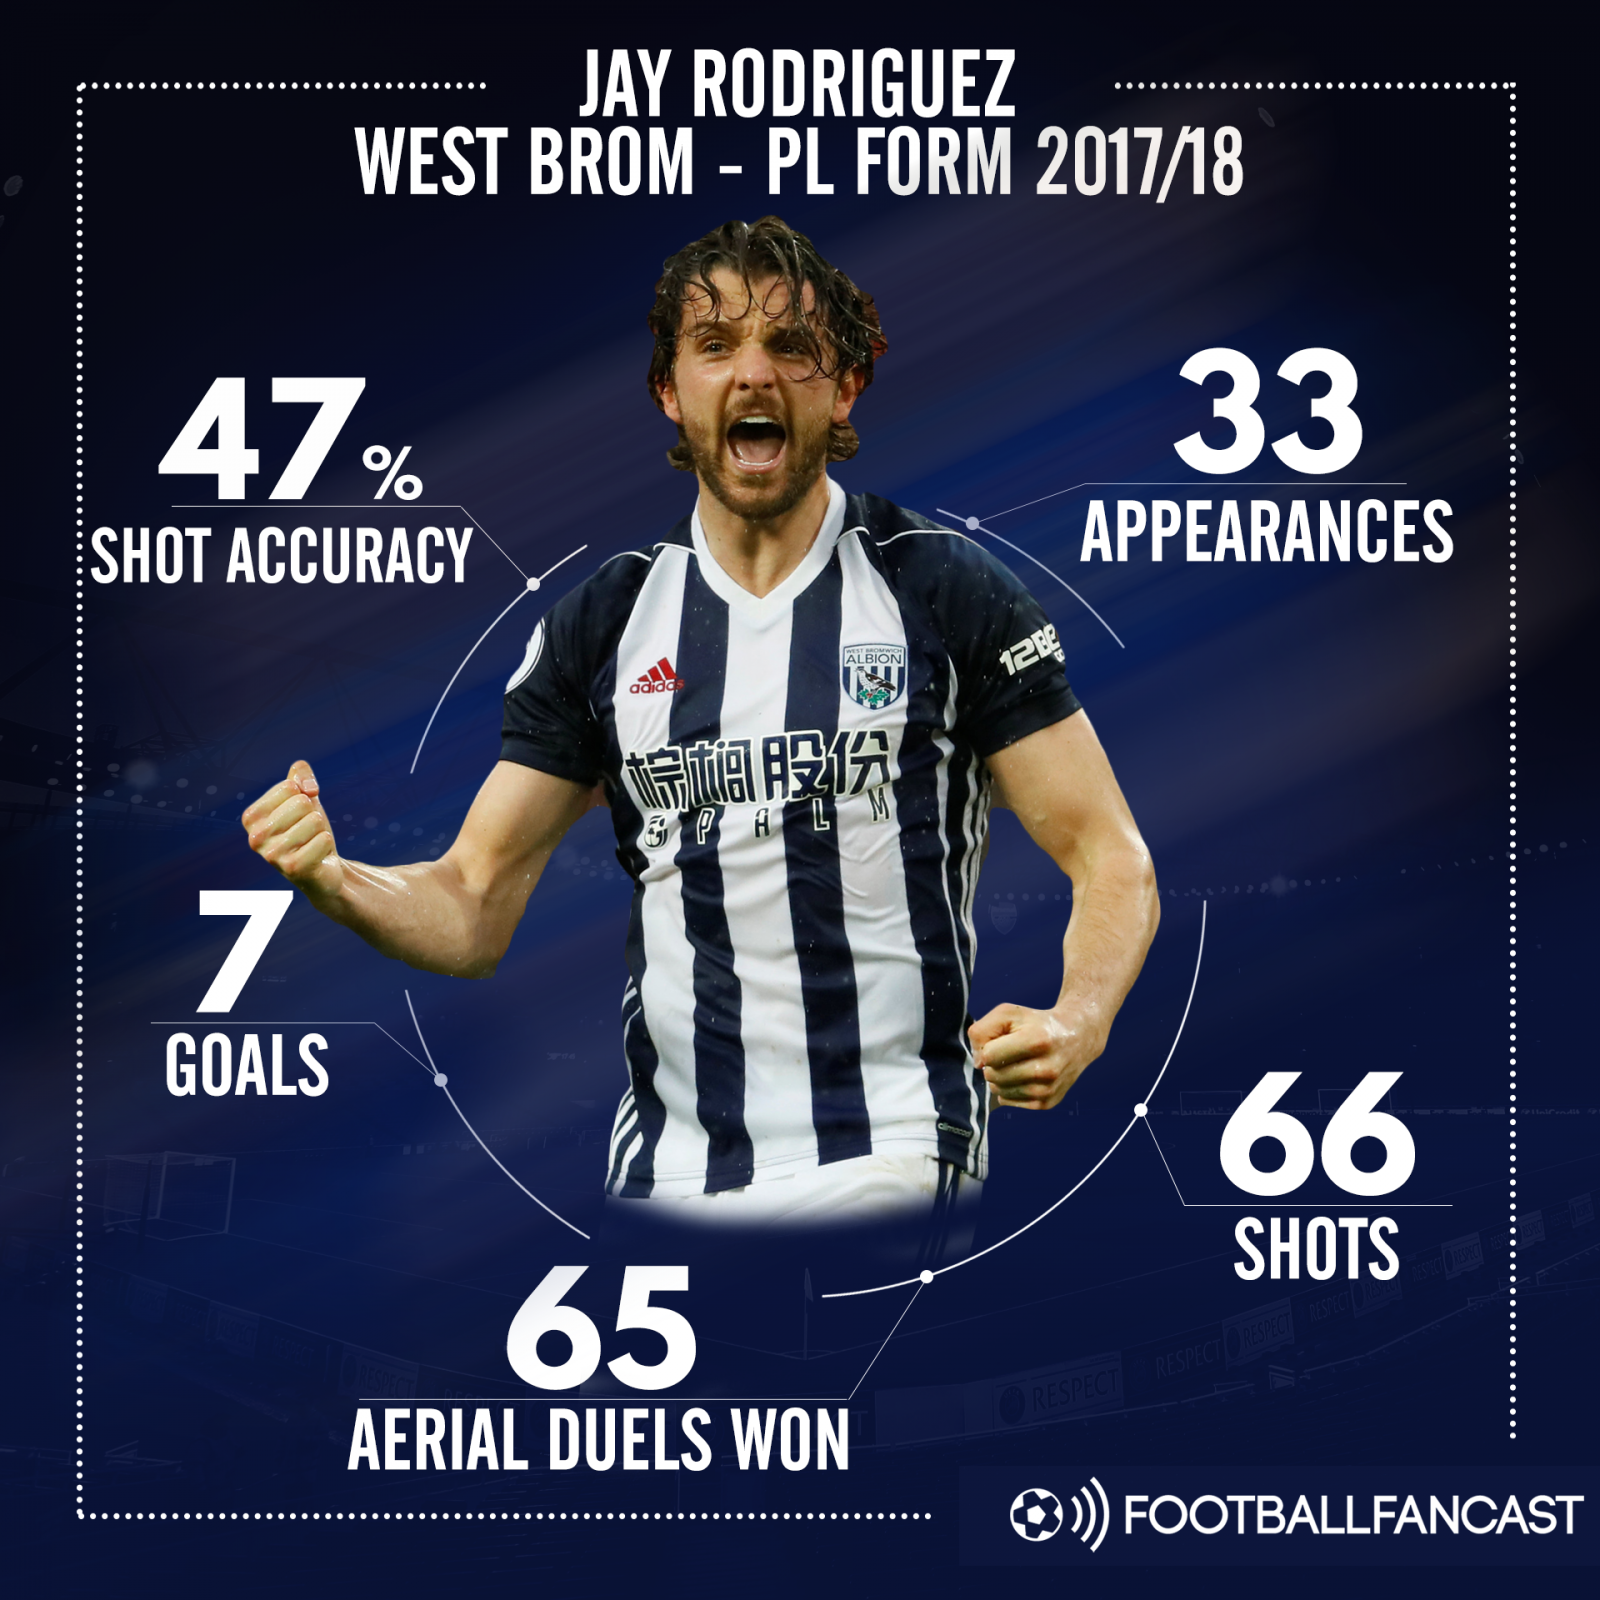 Jay Rodriguez's form in the Premier League this season